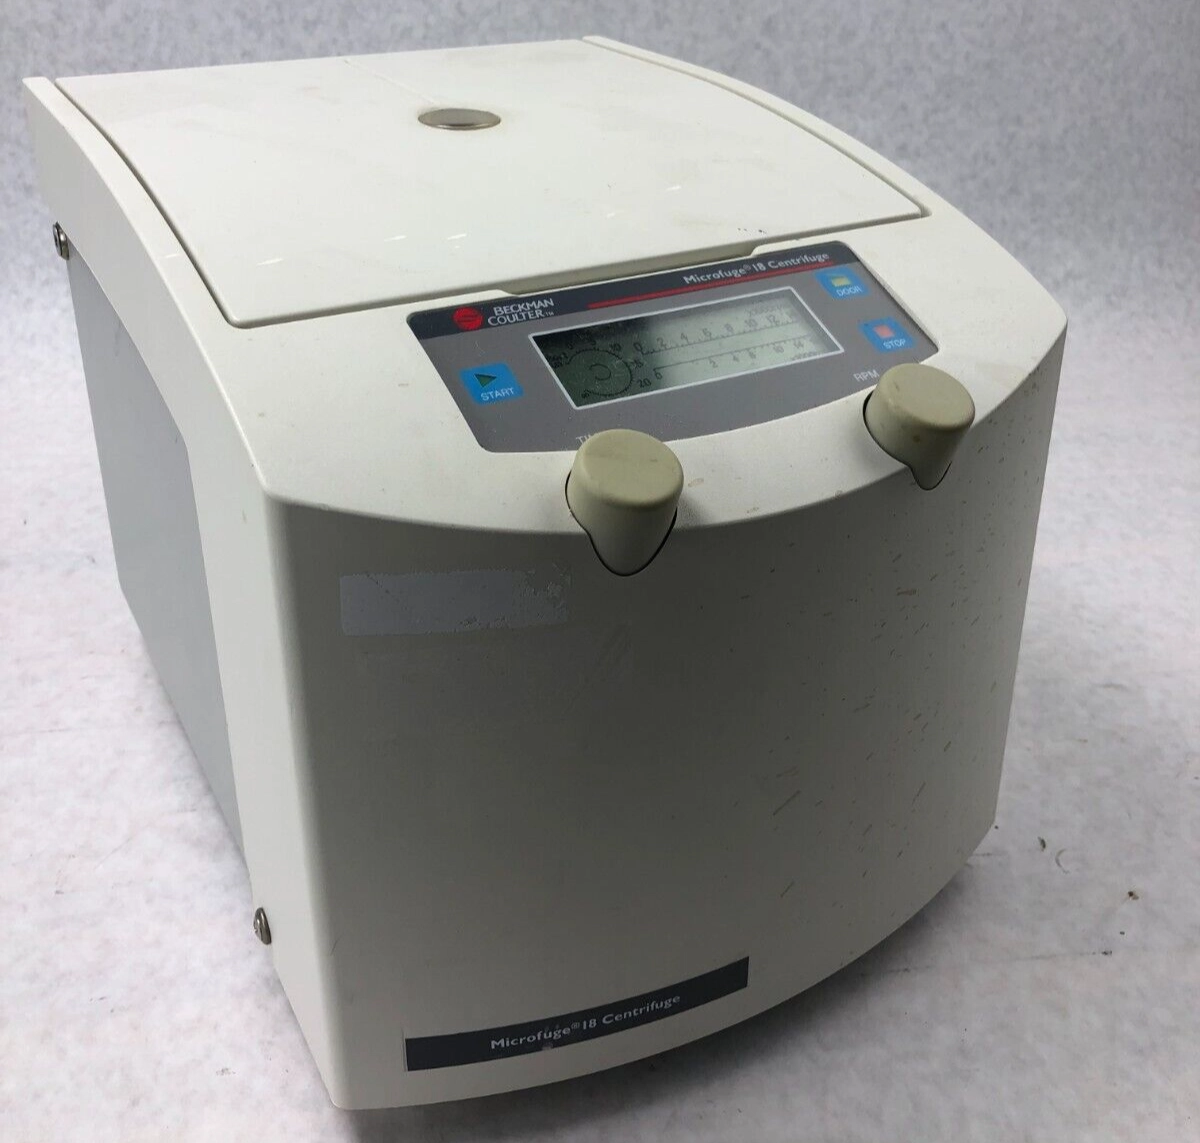 Beckman Coulter Microfuge 18 Centrifuge w/ F241.5P Rotor Working